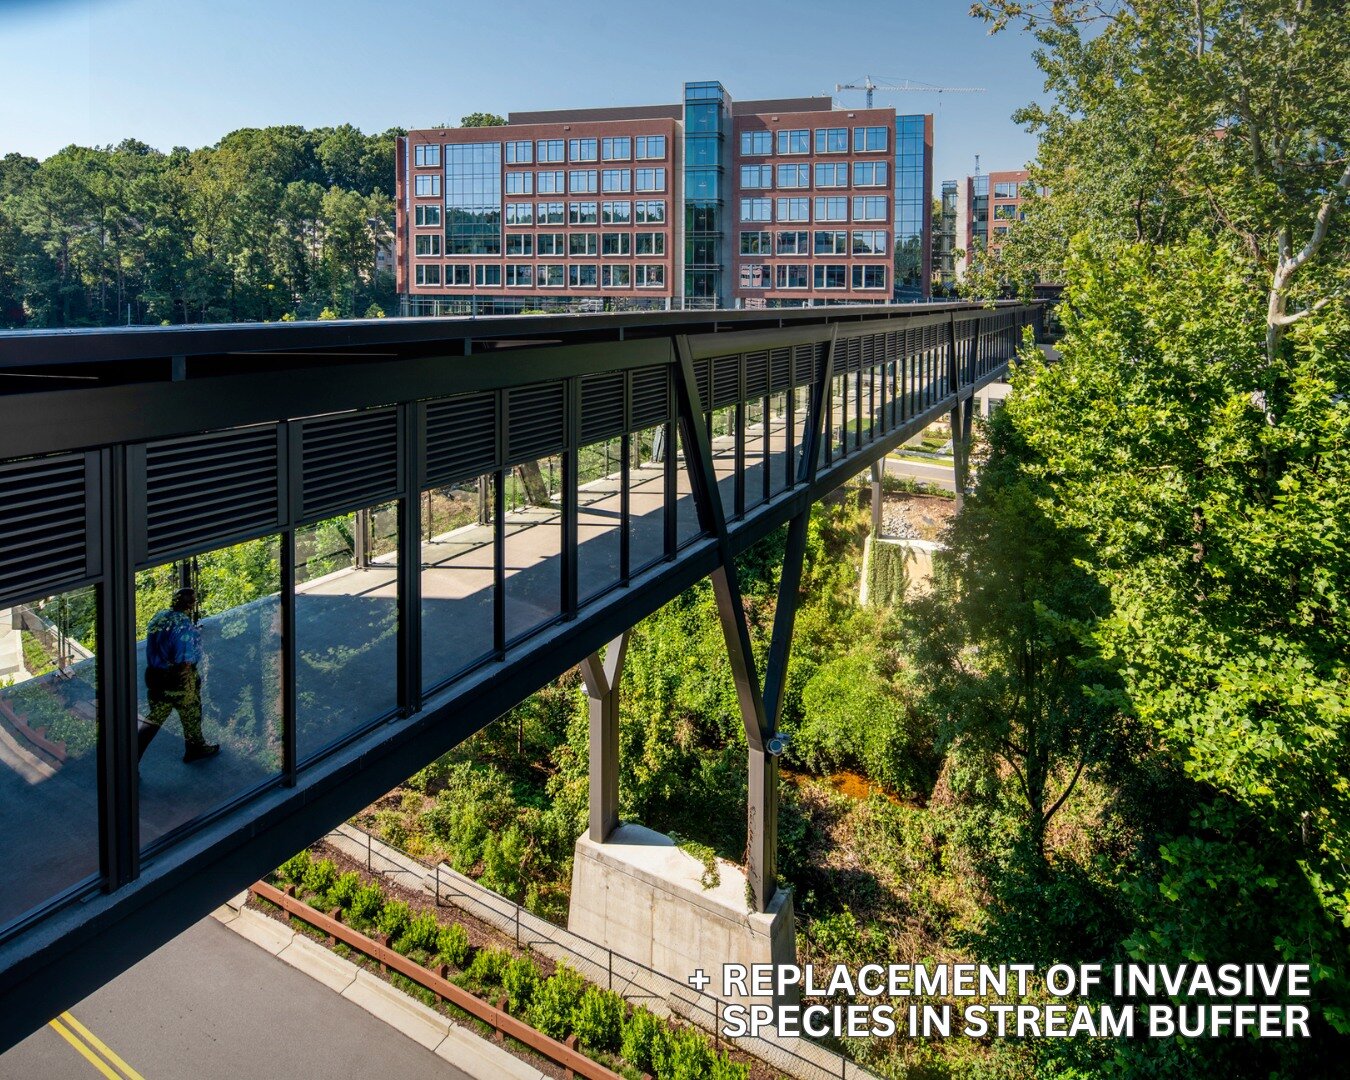 The 70-acre Children&rsquo;s Healthcare of Atlanta North Druid Hills campus blends functionality and #sustainability across therapeutic gardens, plazas, and walking paths connecting the campus buildings. While the Arthur M. Blank Hospital will not op